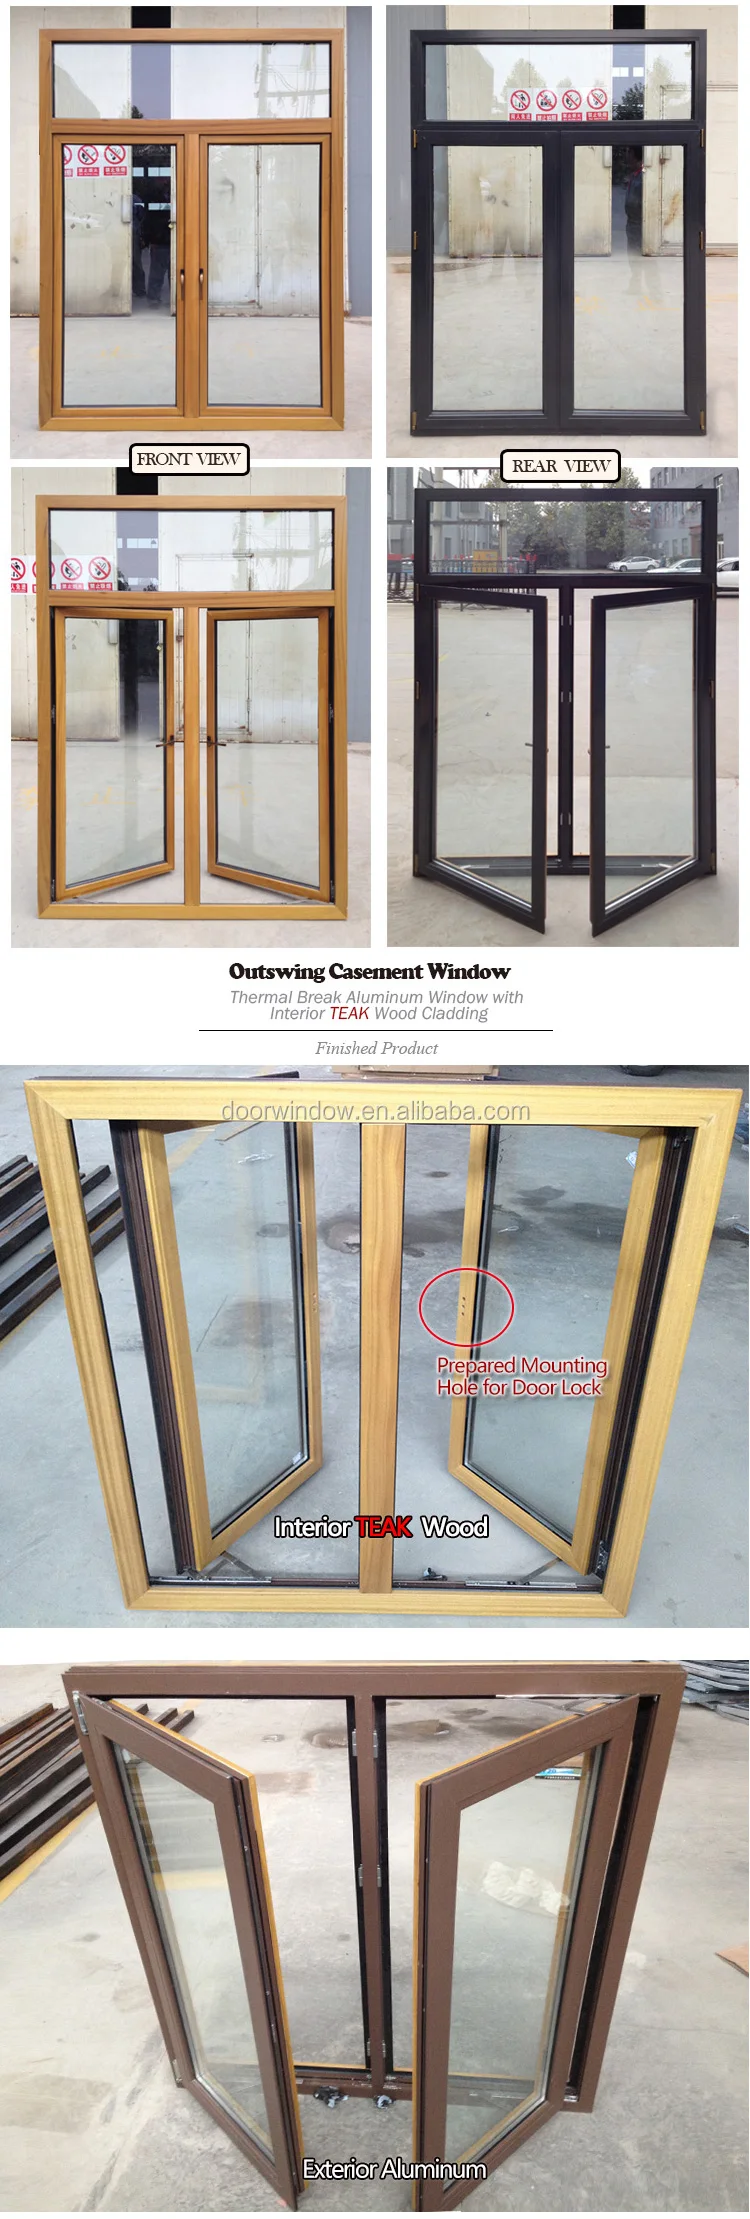 Factory outlet wood windows photos transom grain finish